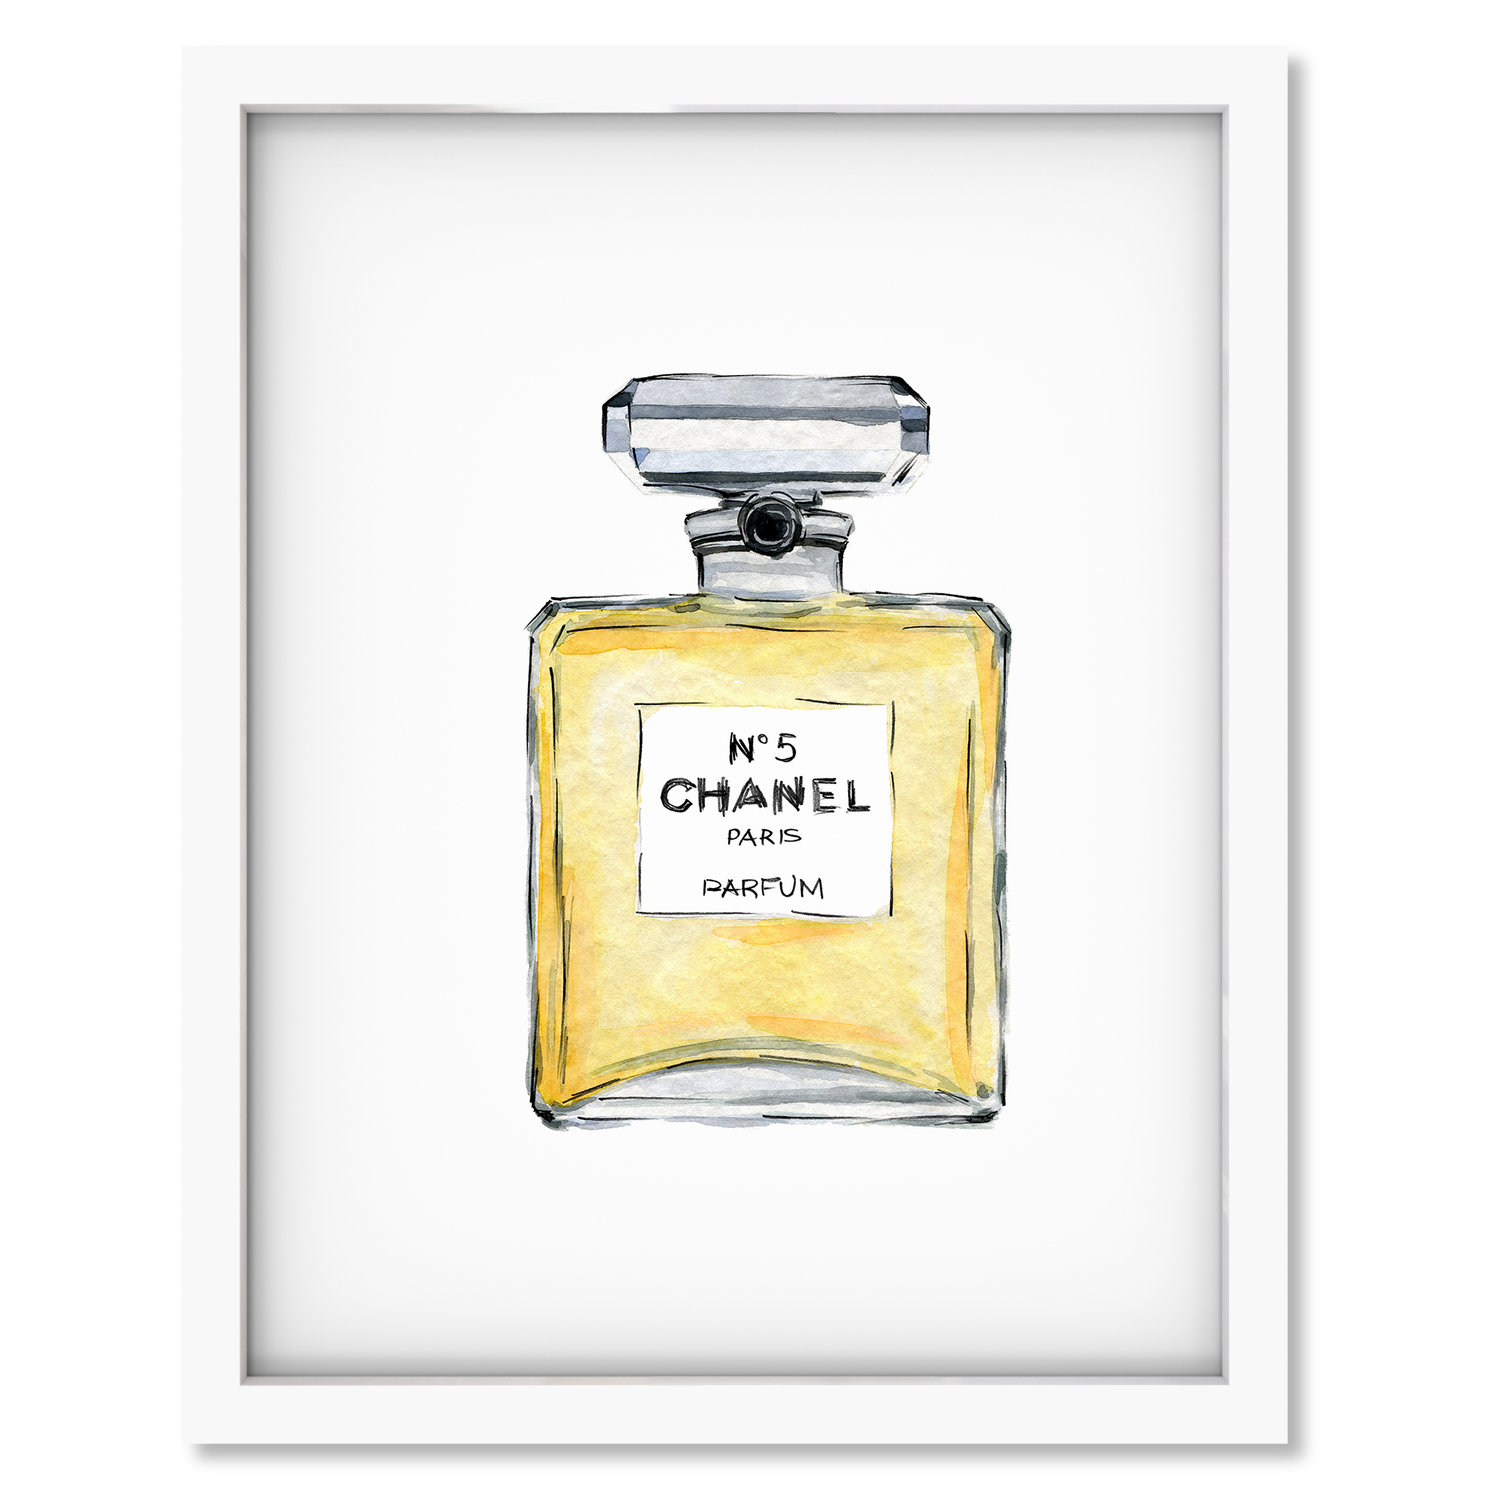 Chanel No. 5 Perfume on Shop Display, Chanel No Editorial Stock Image -  Image of gift, object: 168074934